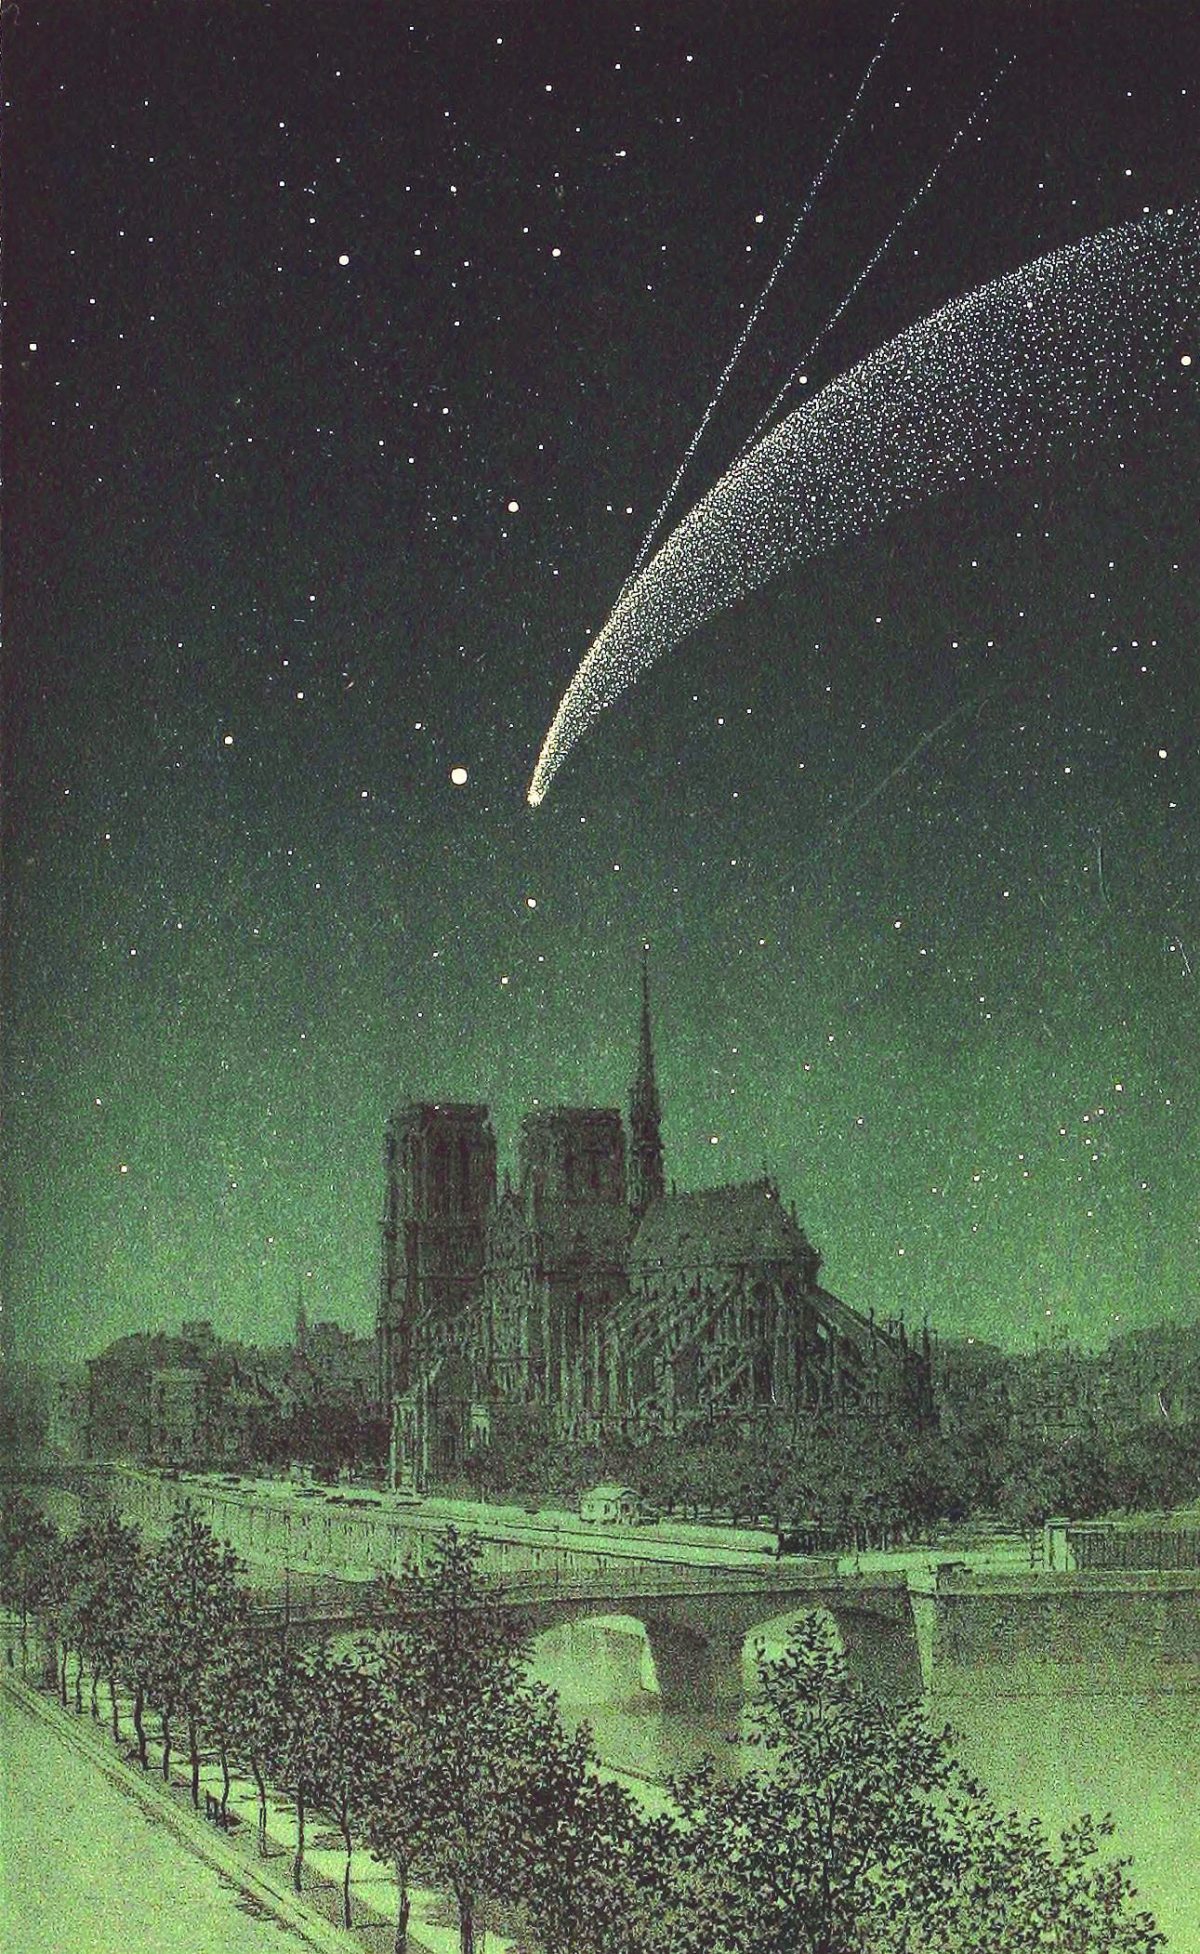 Comet Donati above Notre-Dame. Drawing published in The sky of Amédée Guillemin, fifth edition (1877), Hachette.